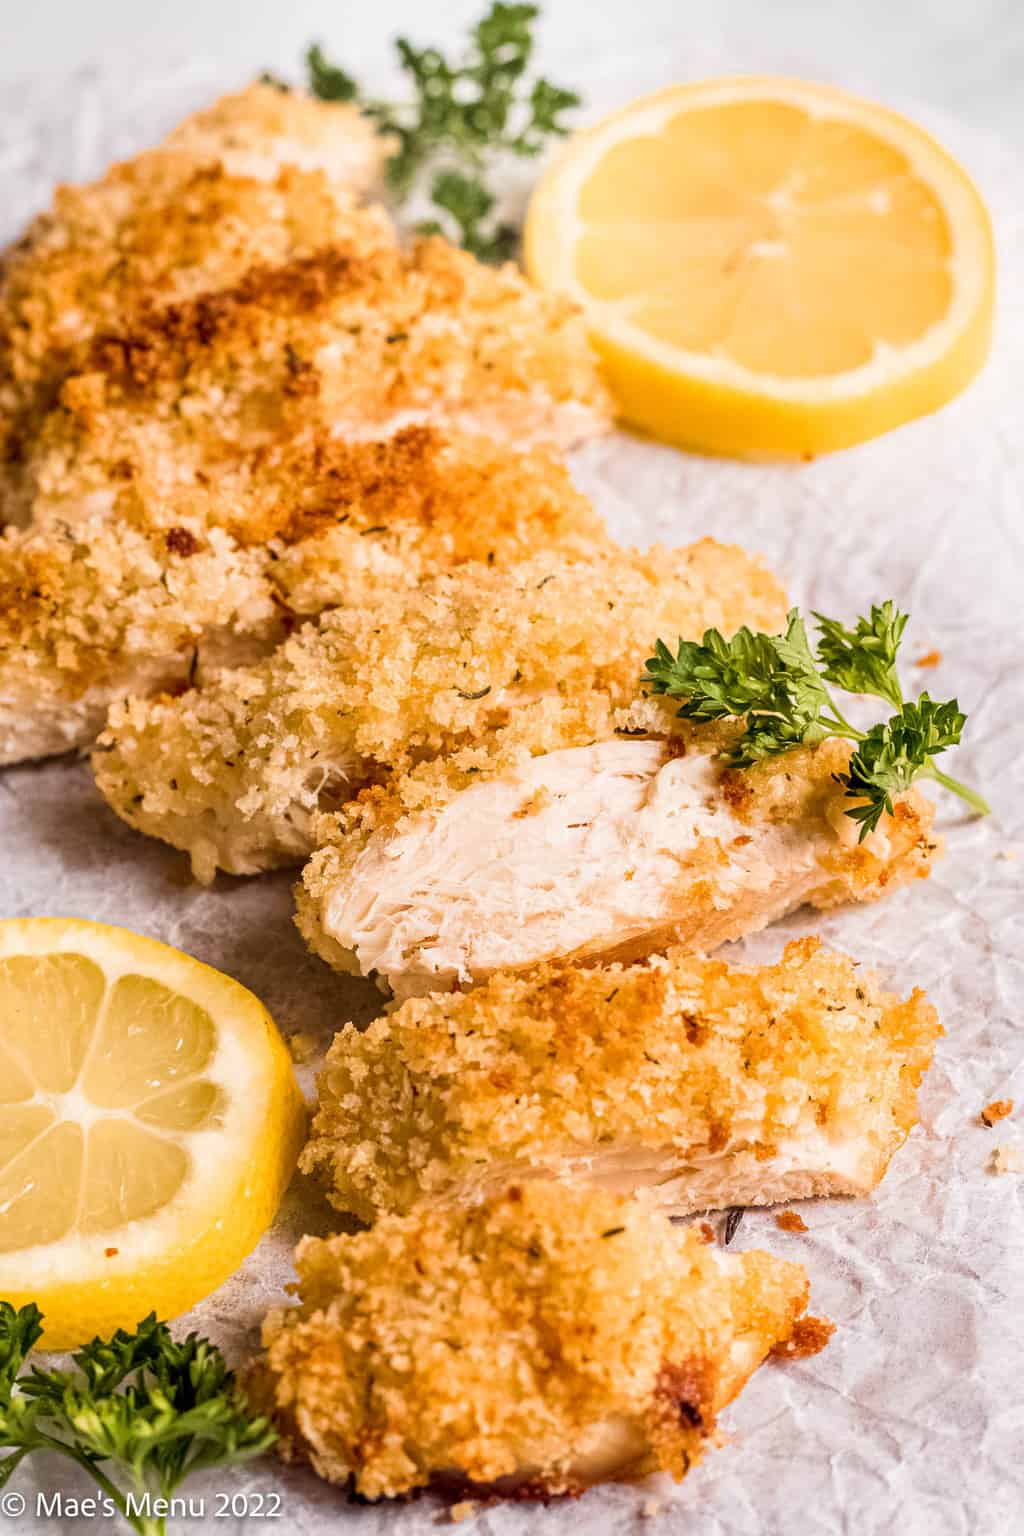 Baked panko chicken breasts with lemon and parsley.